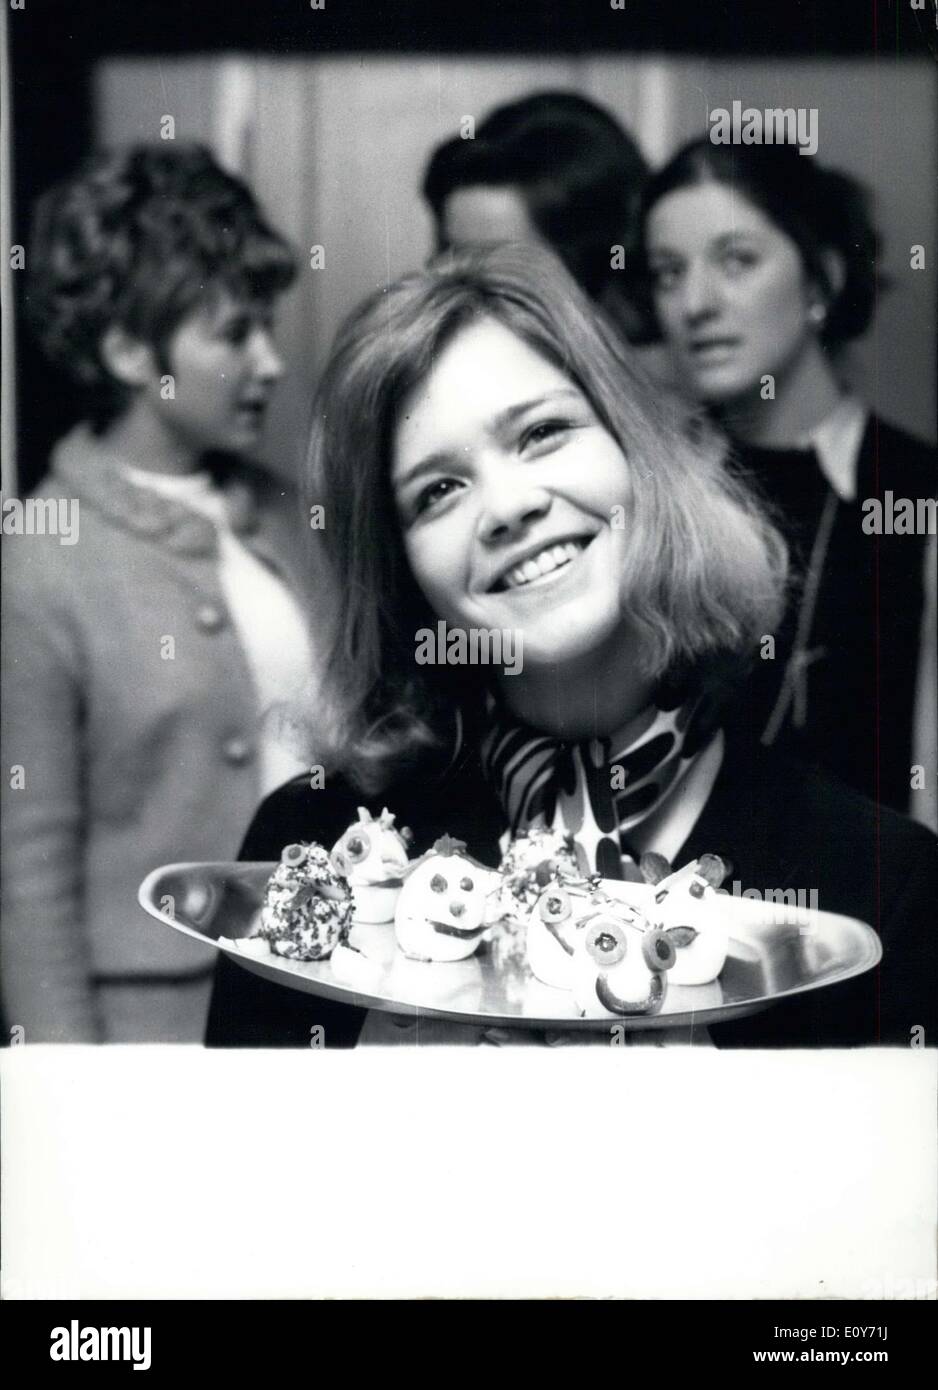 Mar. 15, 1969 - This student from the International Housekeeping College has a confection that is both tasty and ''pleasant to look at.'' Edda Meyer-Berkhout is the leader of the institute, which gives a solid foundation for a ''housewife-like'' education. One learns to be a good hostess among other things. These little confections were made for Easter. Stock Photo